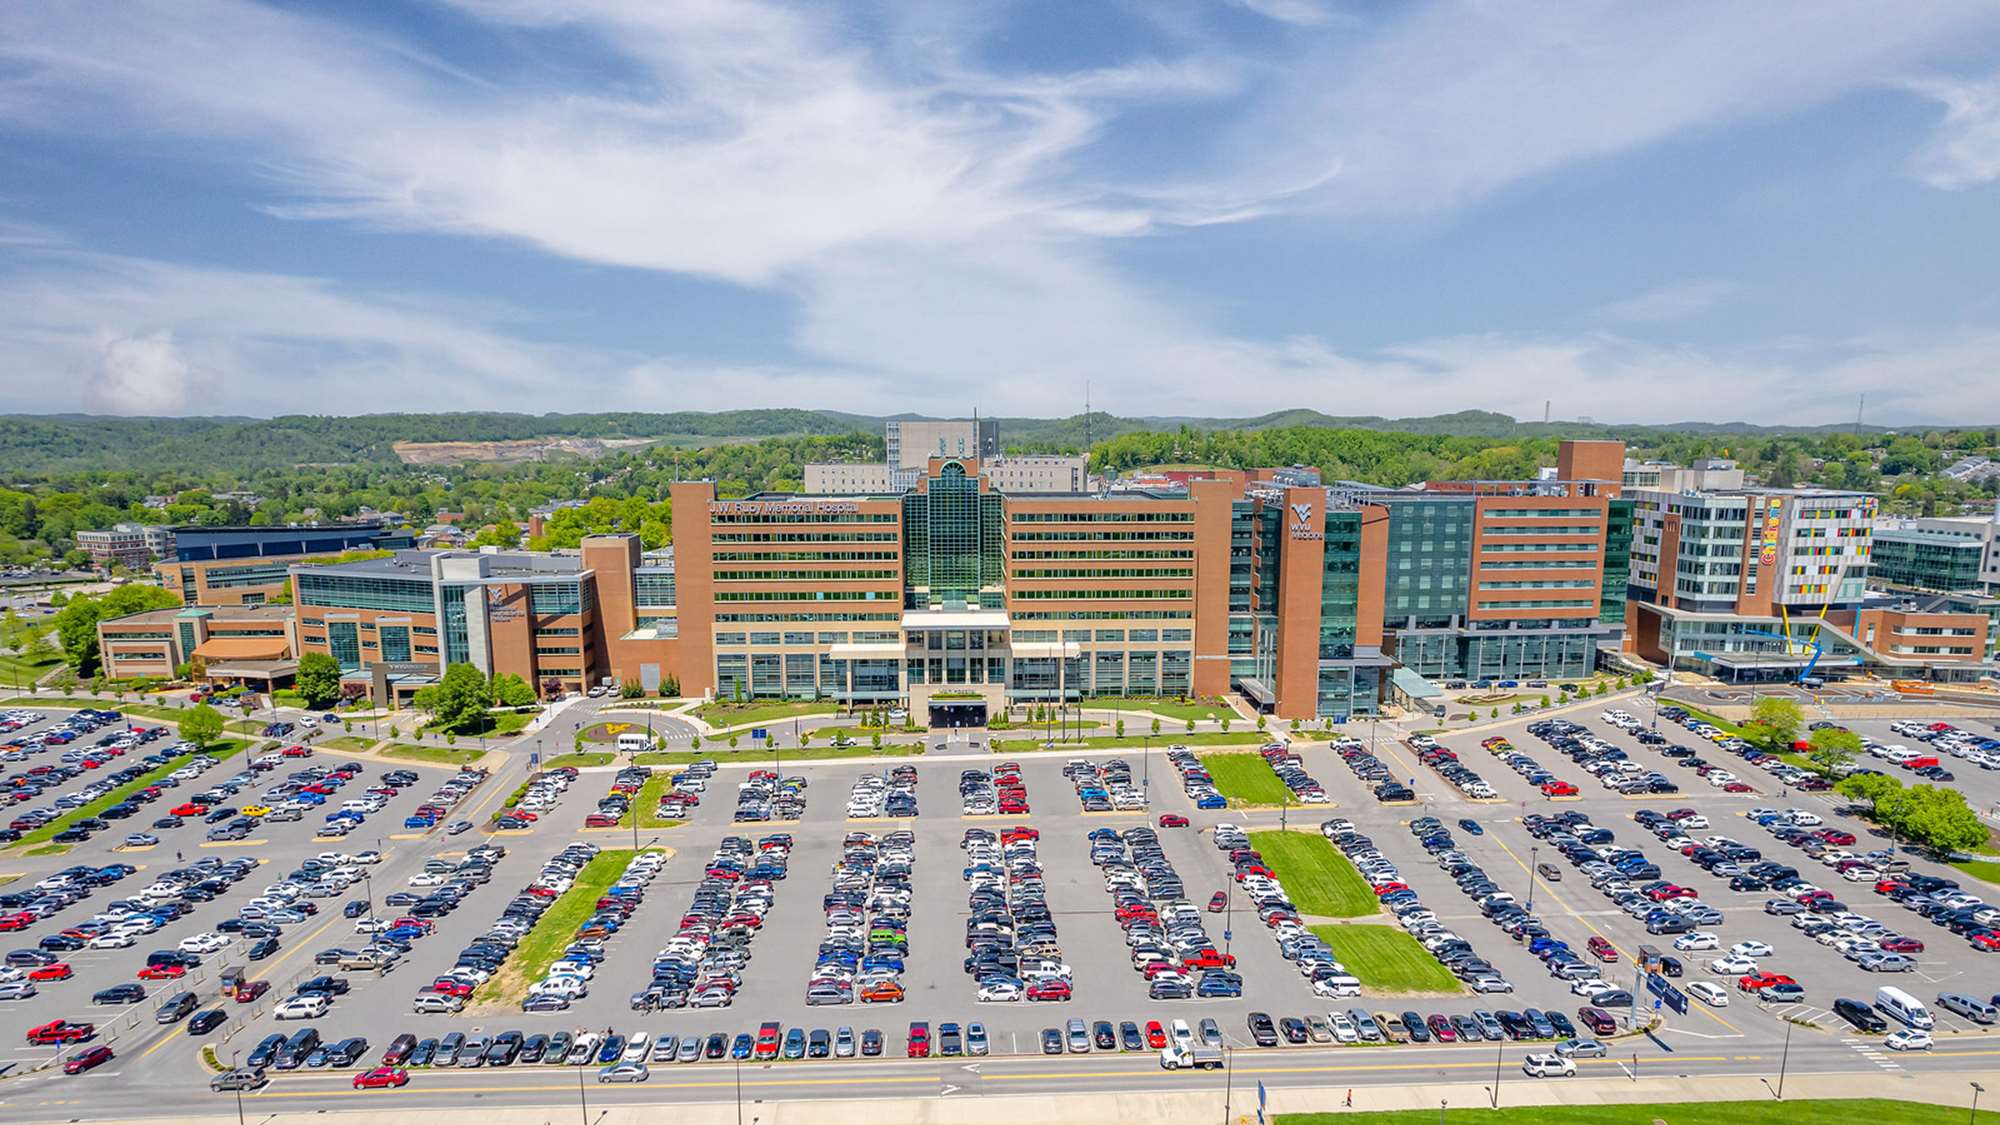 Aerial image of Ruby Memorial Hospital and parking lot